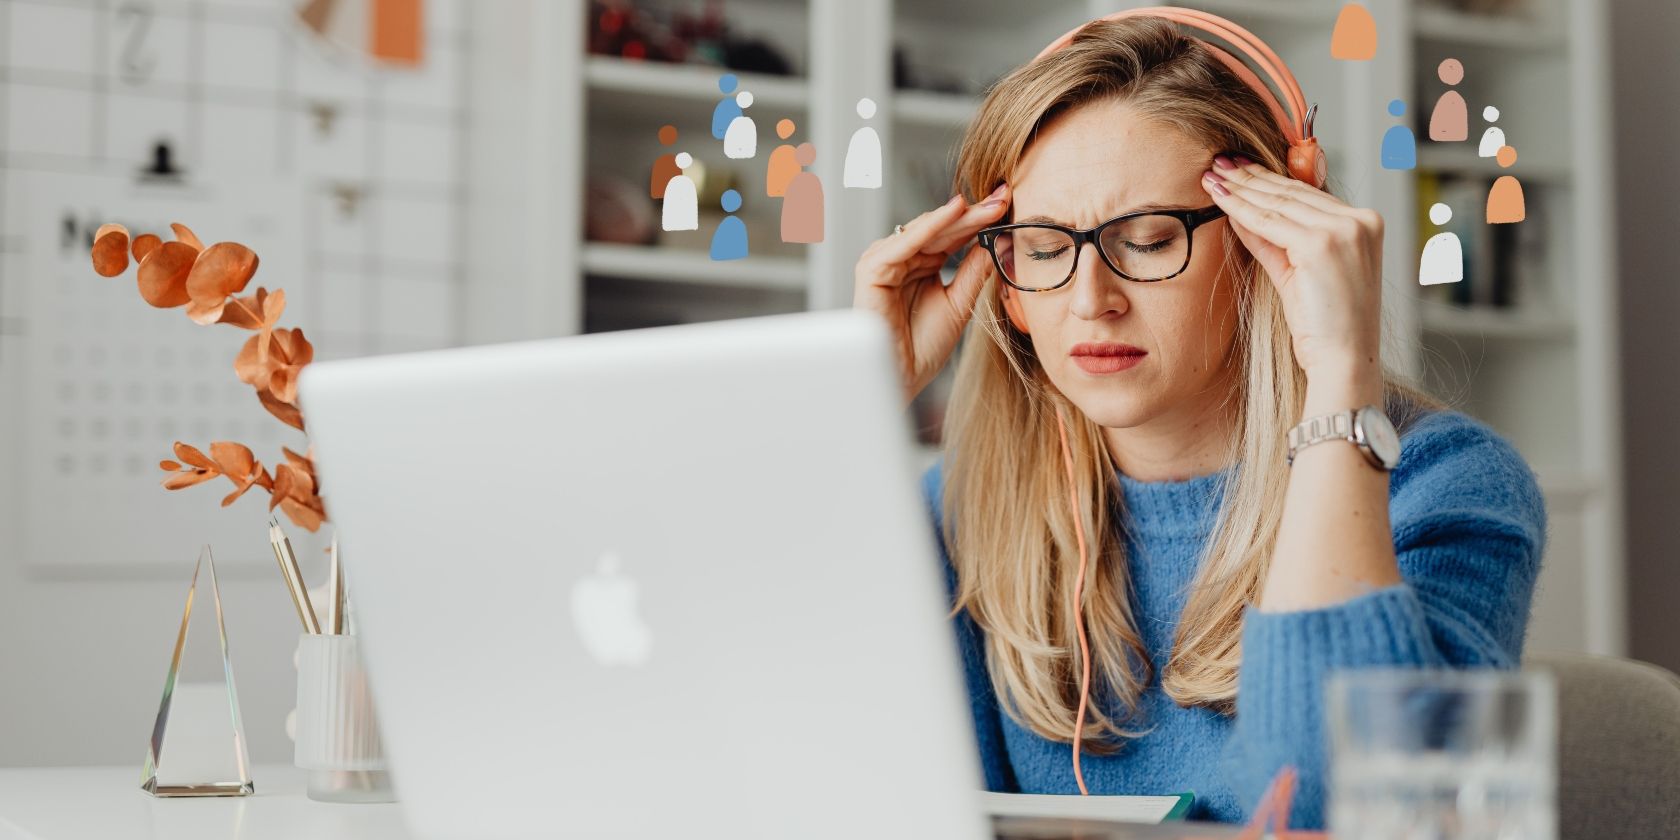 A frustrated woman in glasses and a blue sweater sitting in front of a MacBook